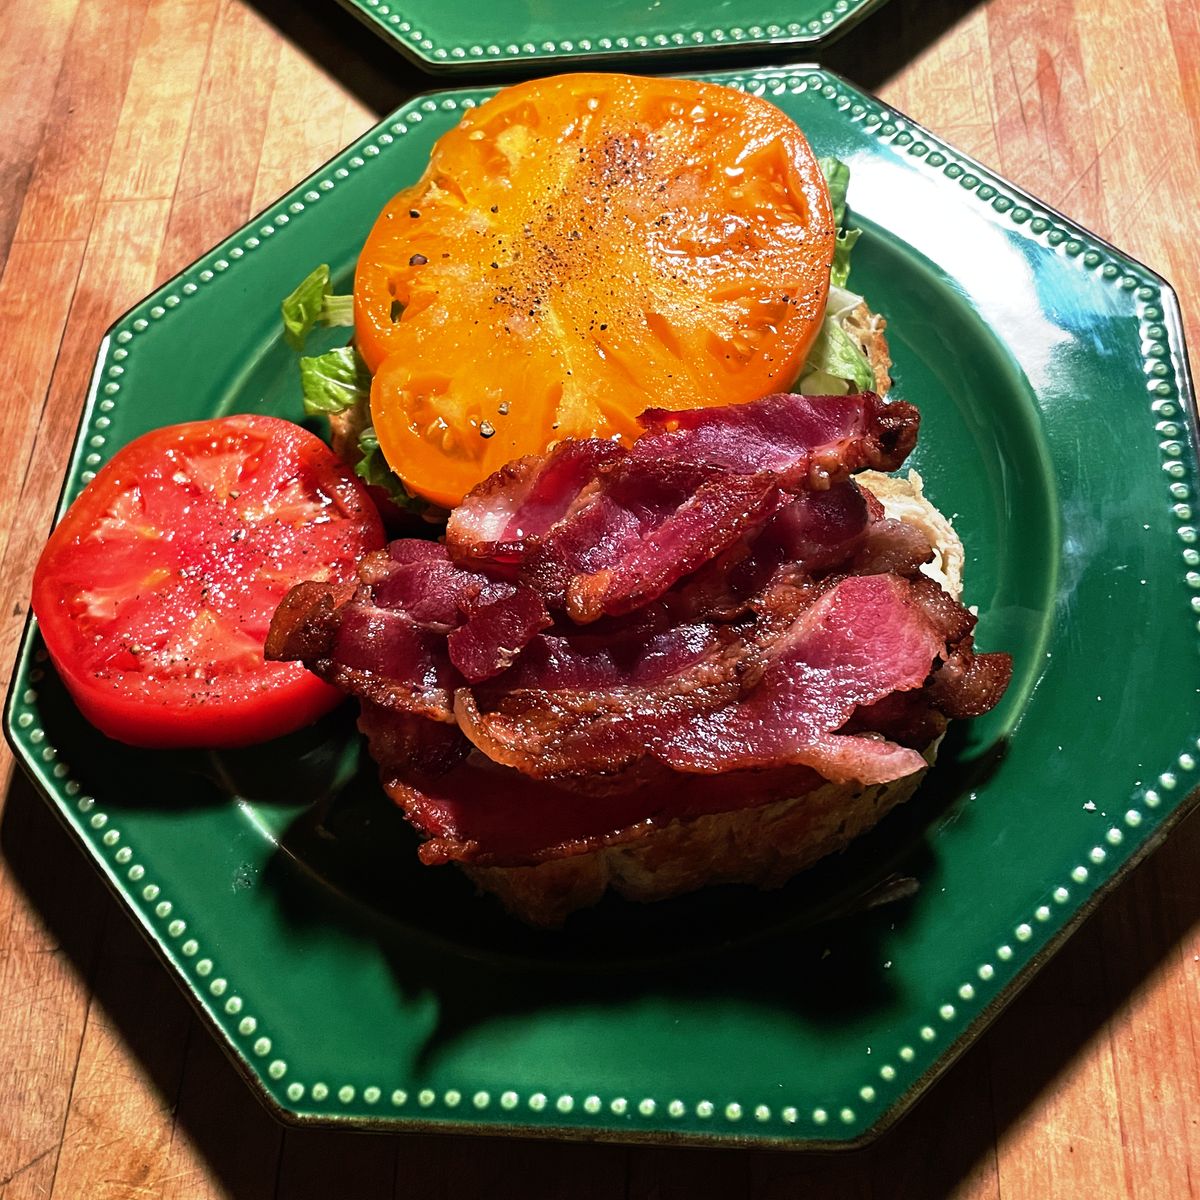 The Best BLT, Heirloom Tomatoes on a Toasted Olive Oil Bread with Thick Cut Pasture Bacon